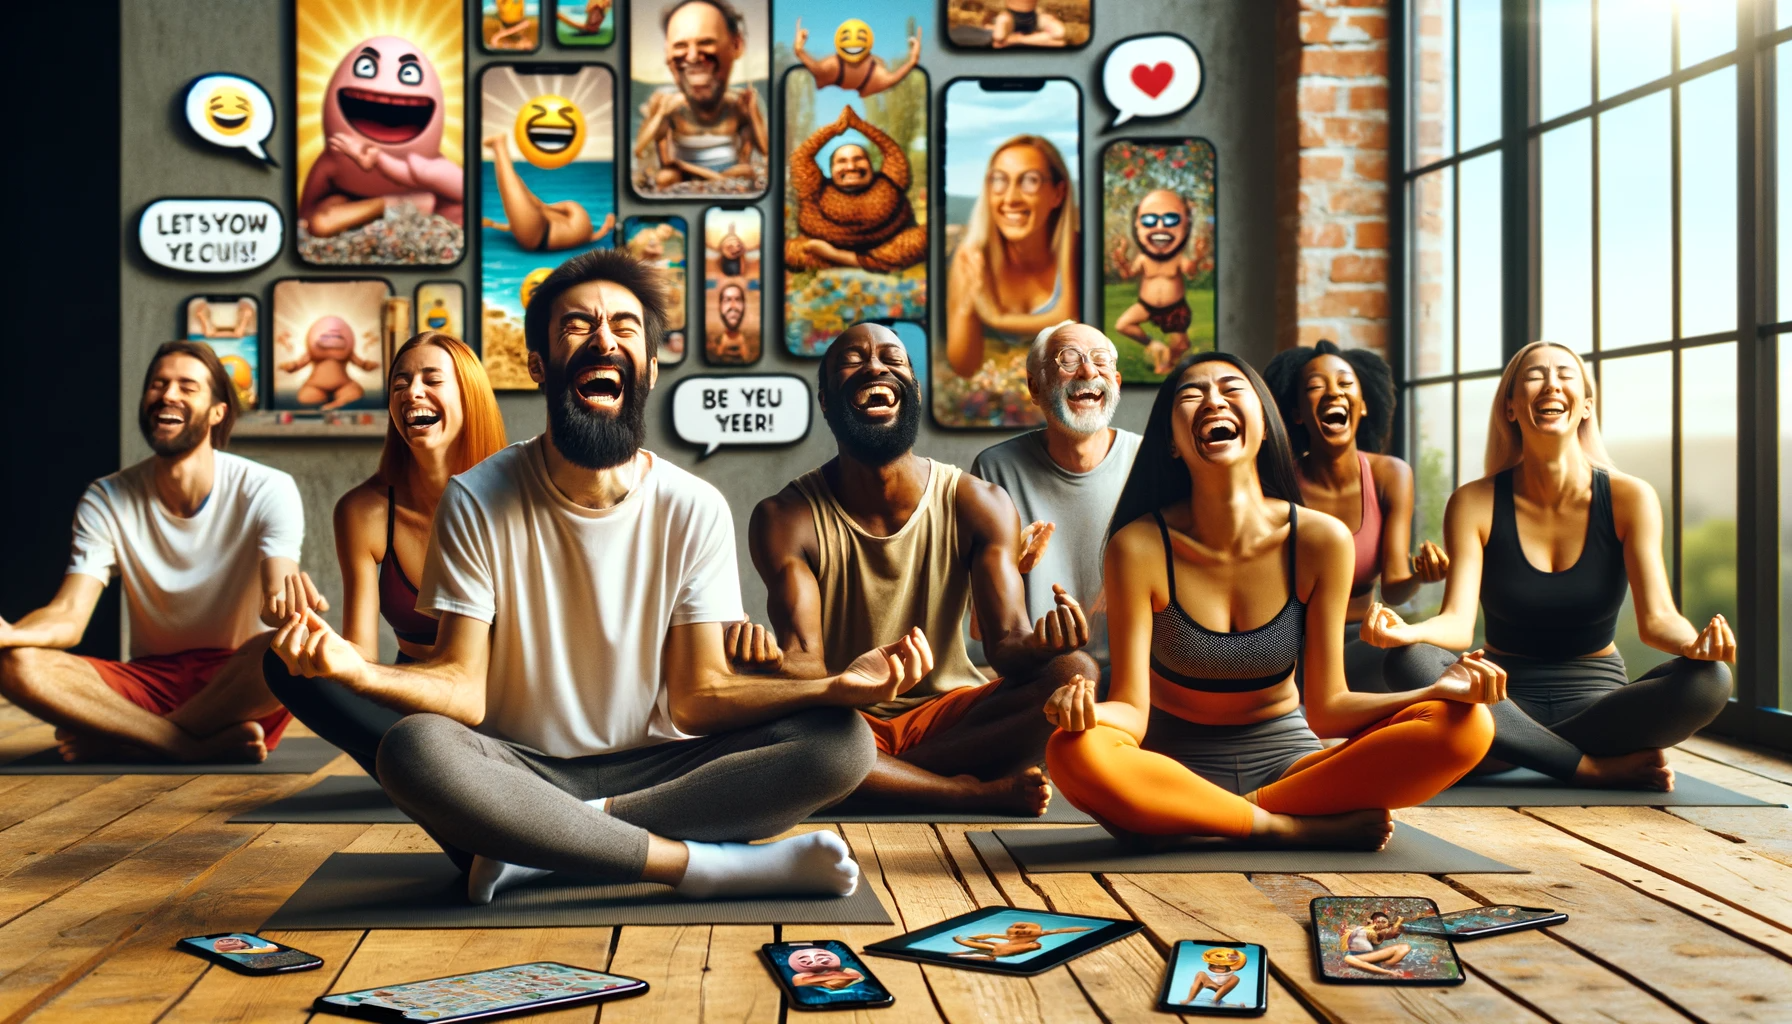 diverse people practicing yoga in a humorous and lively setting, with smartphones and laptops displaying yoga-related memes